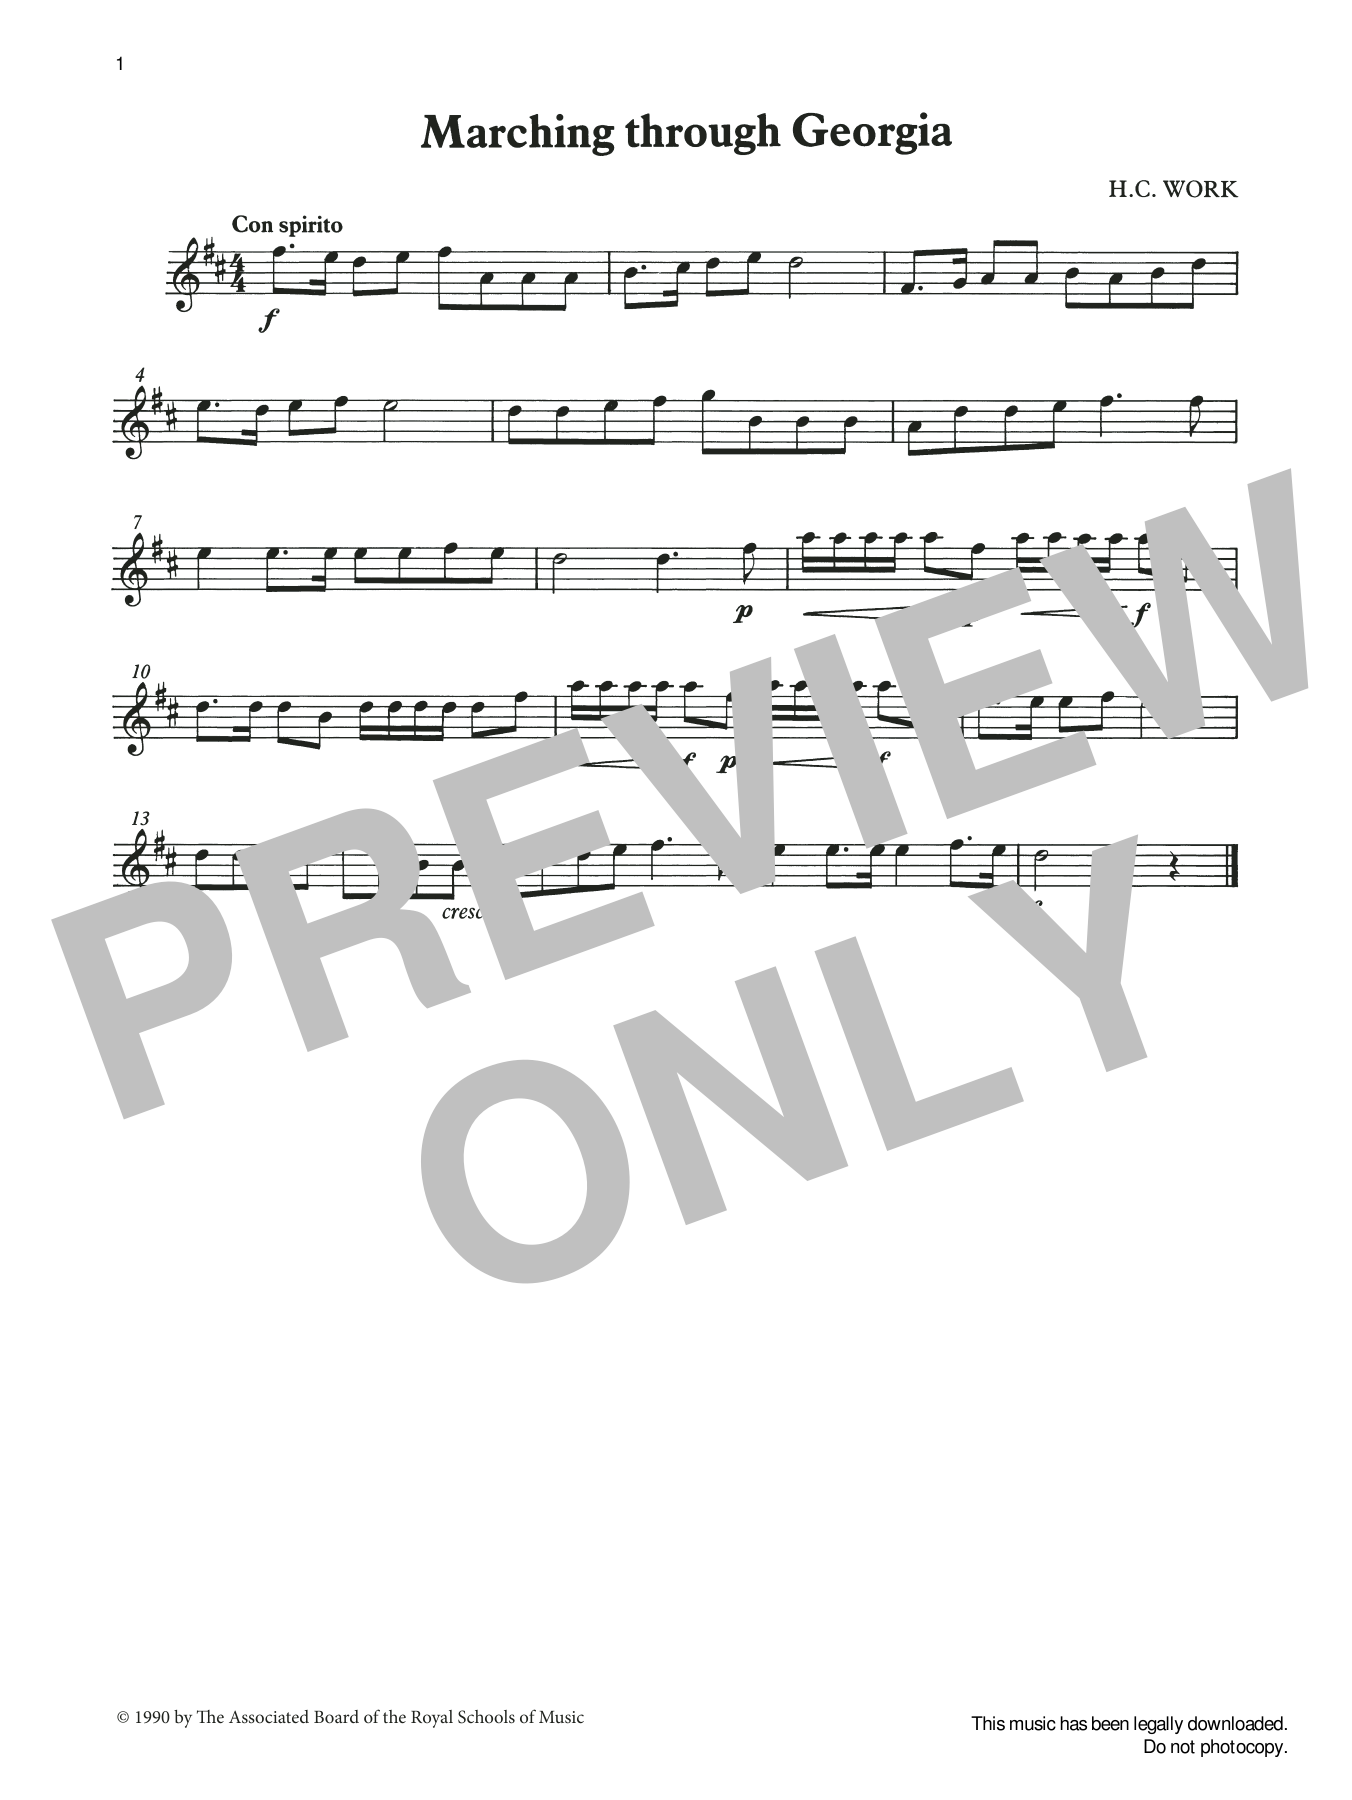 Download Henry Clay Work Marching through Georgia from Graded Mu Sheet Music